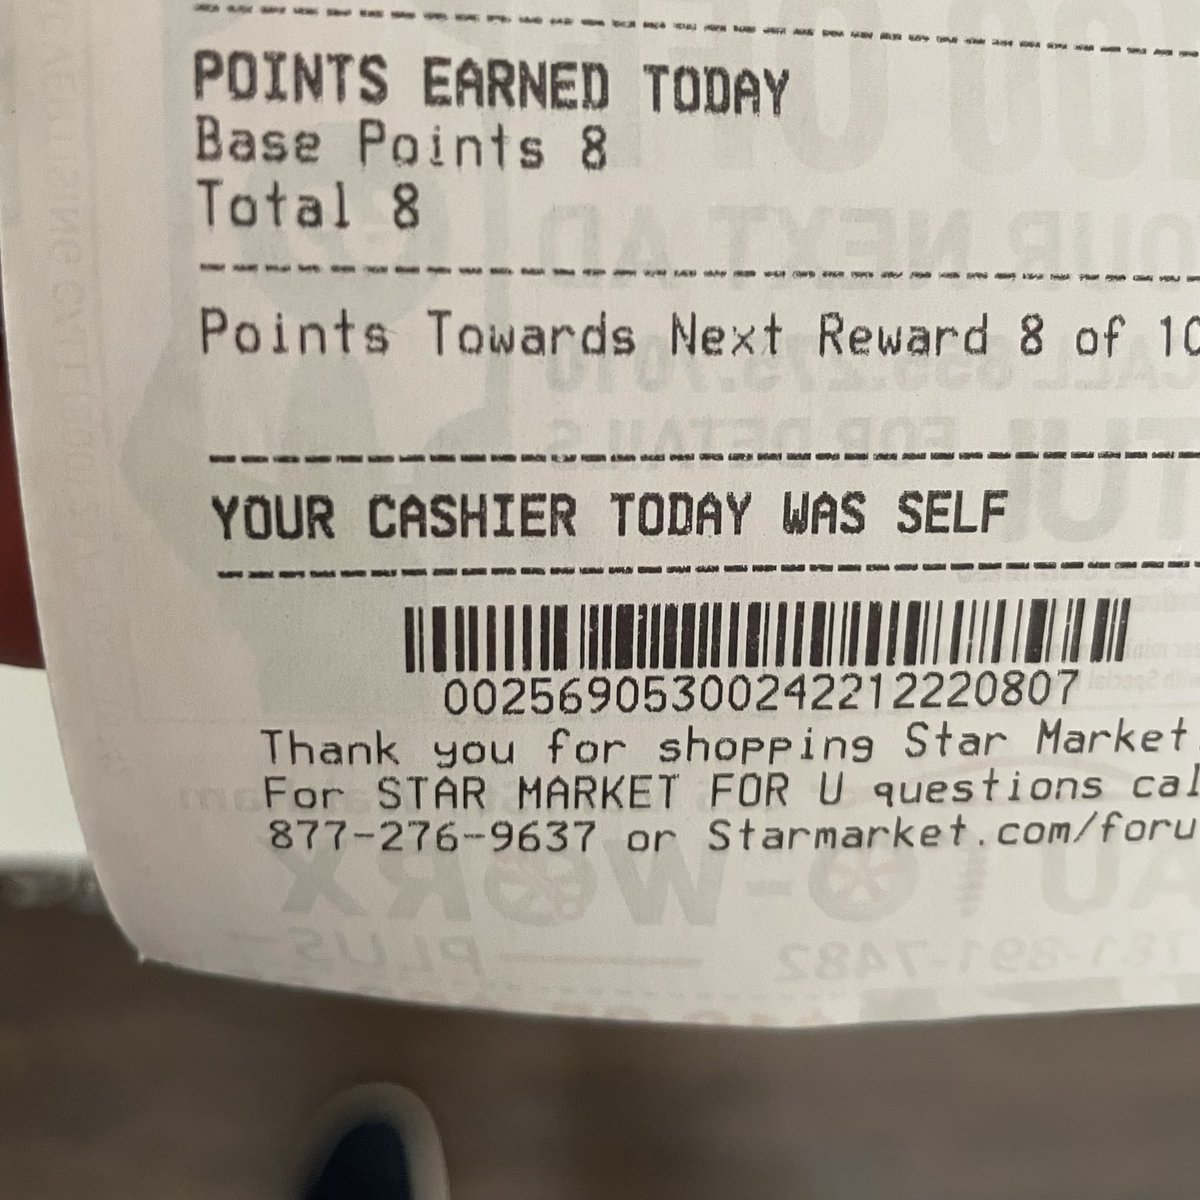 Your cashier today was self.